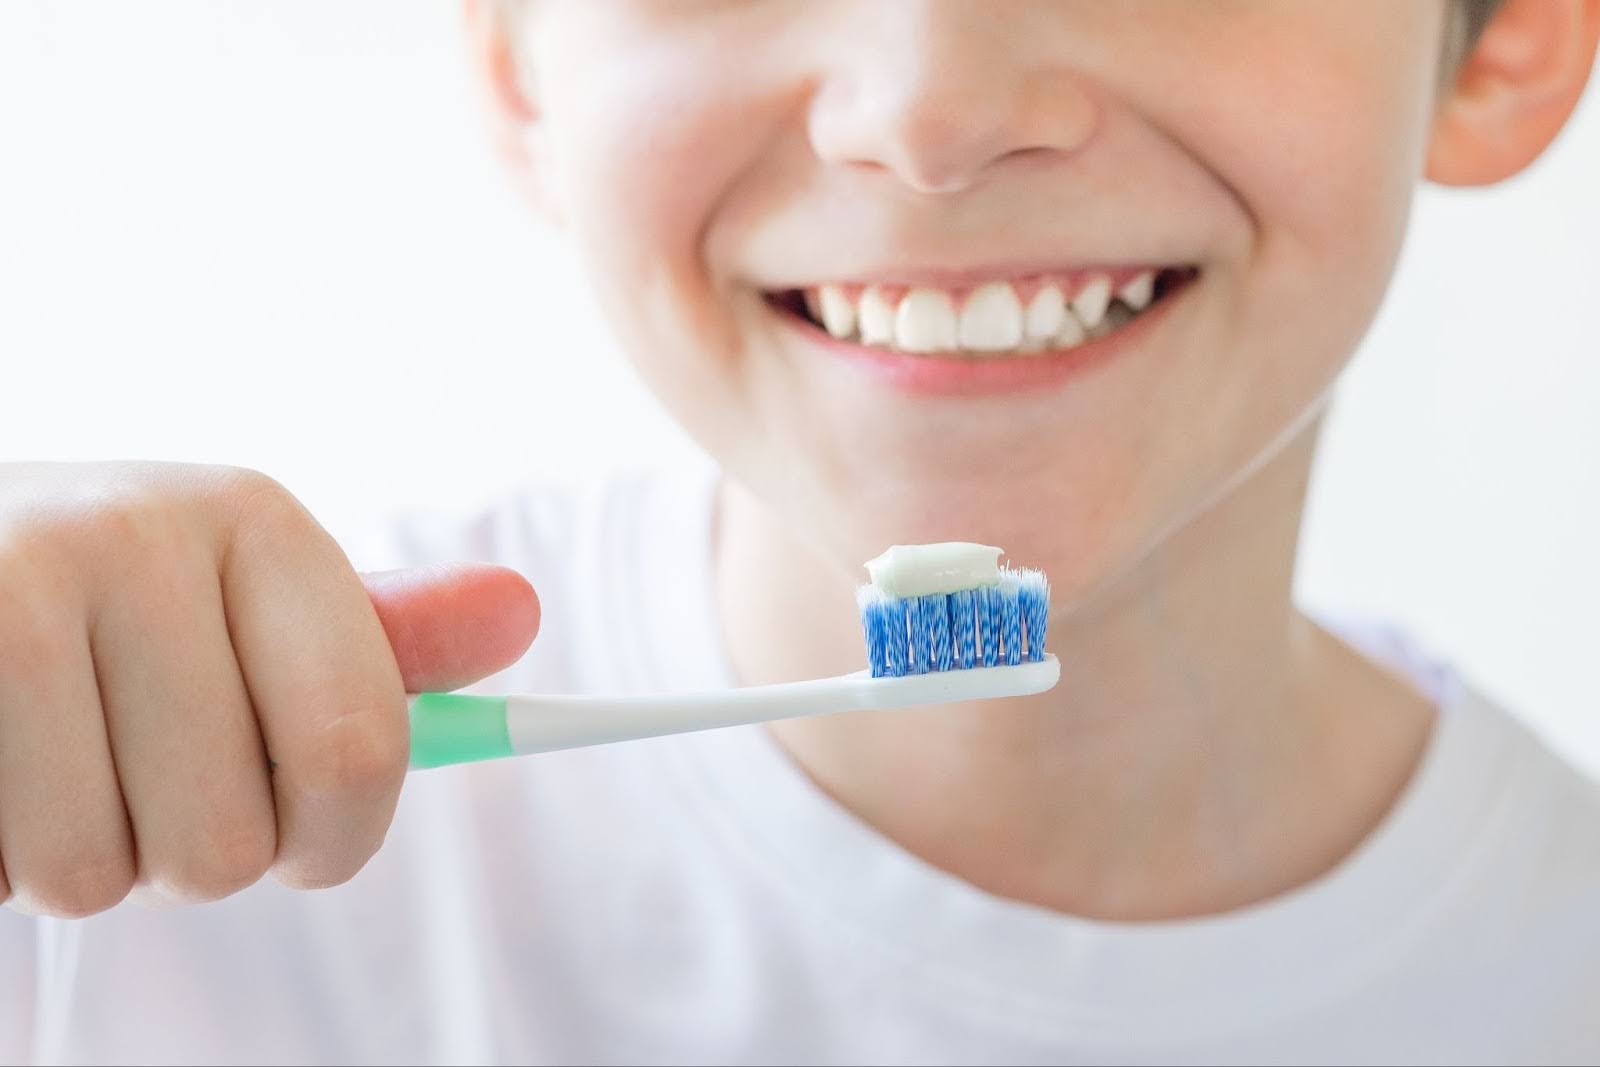 “Organic” toothpastes are not usually the best children’s toothpastes